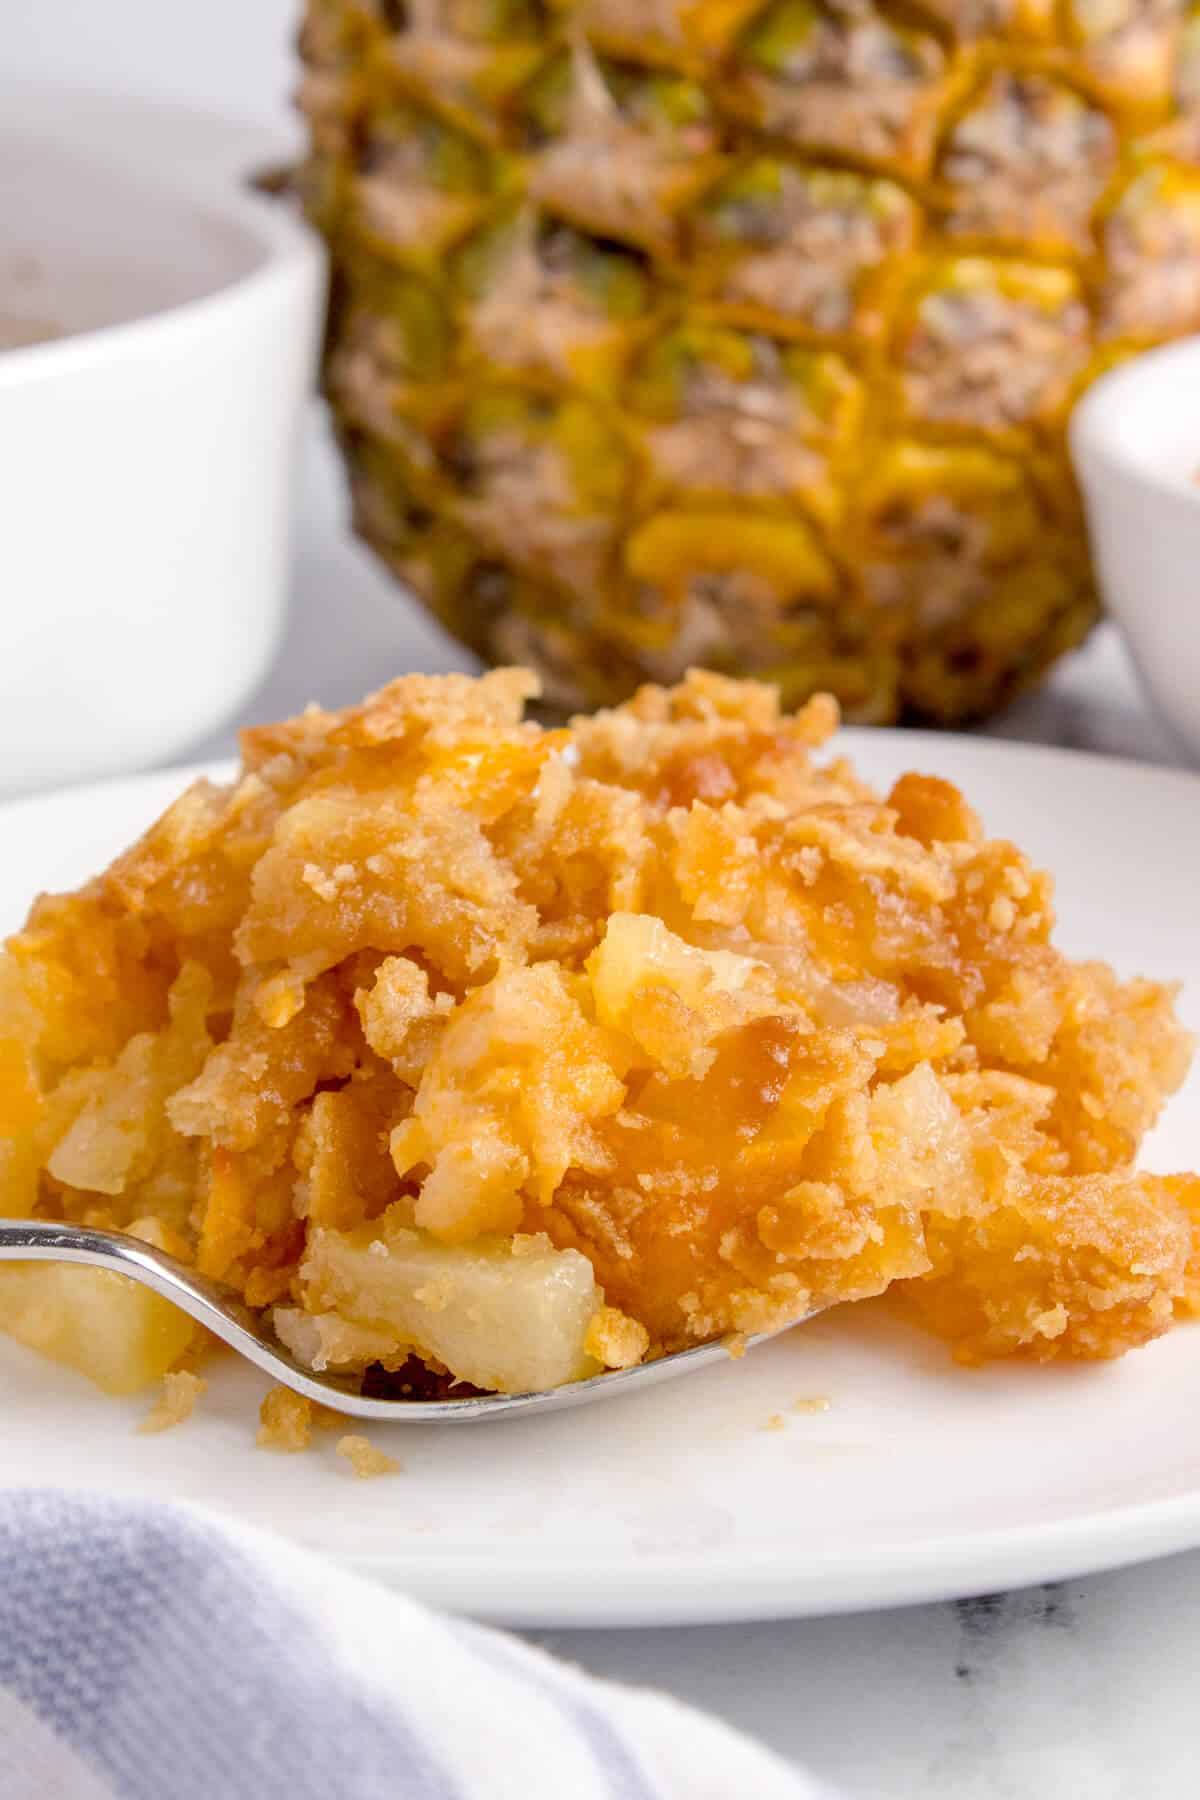 A scoop of pineapple casserole on a plate.